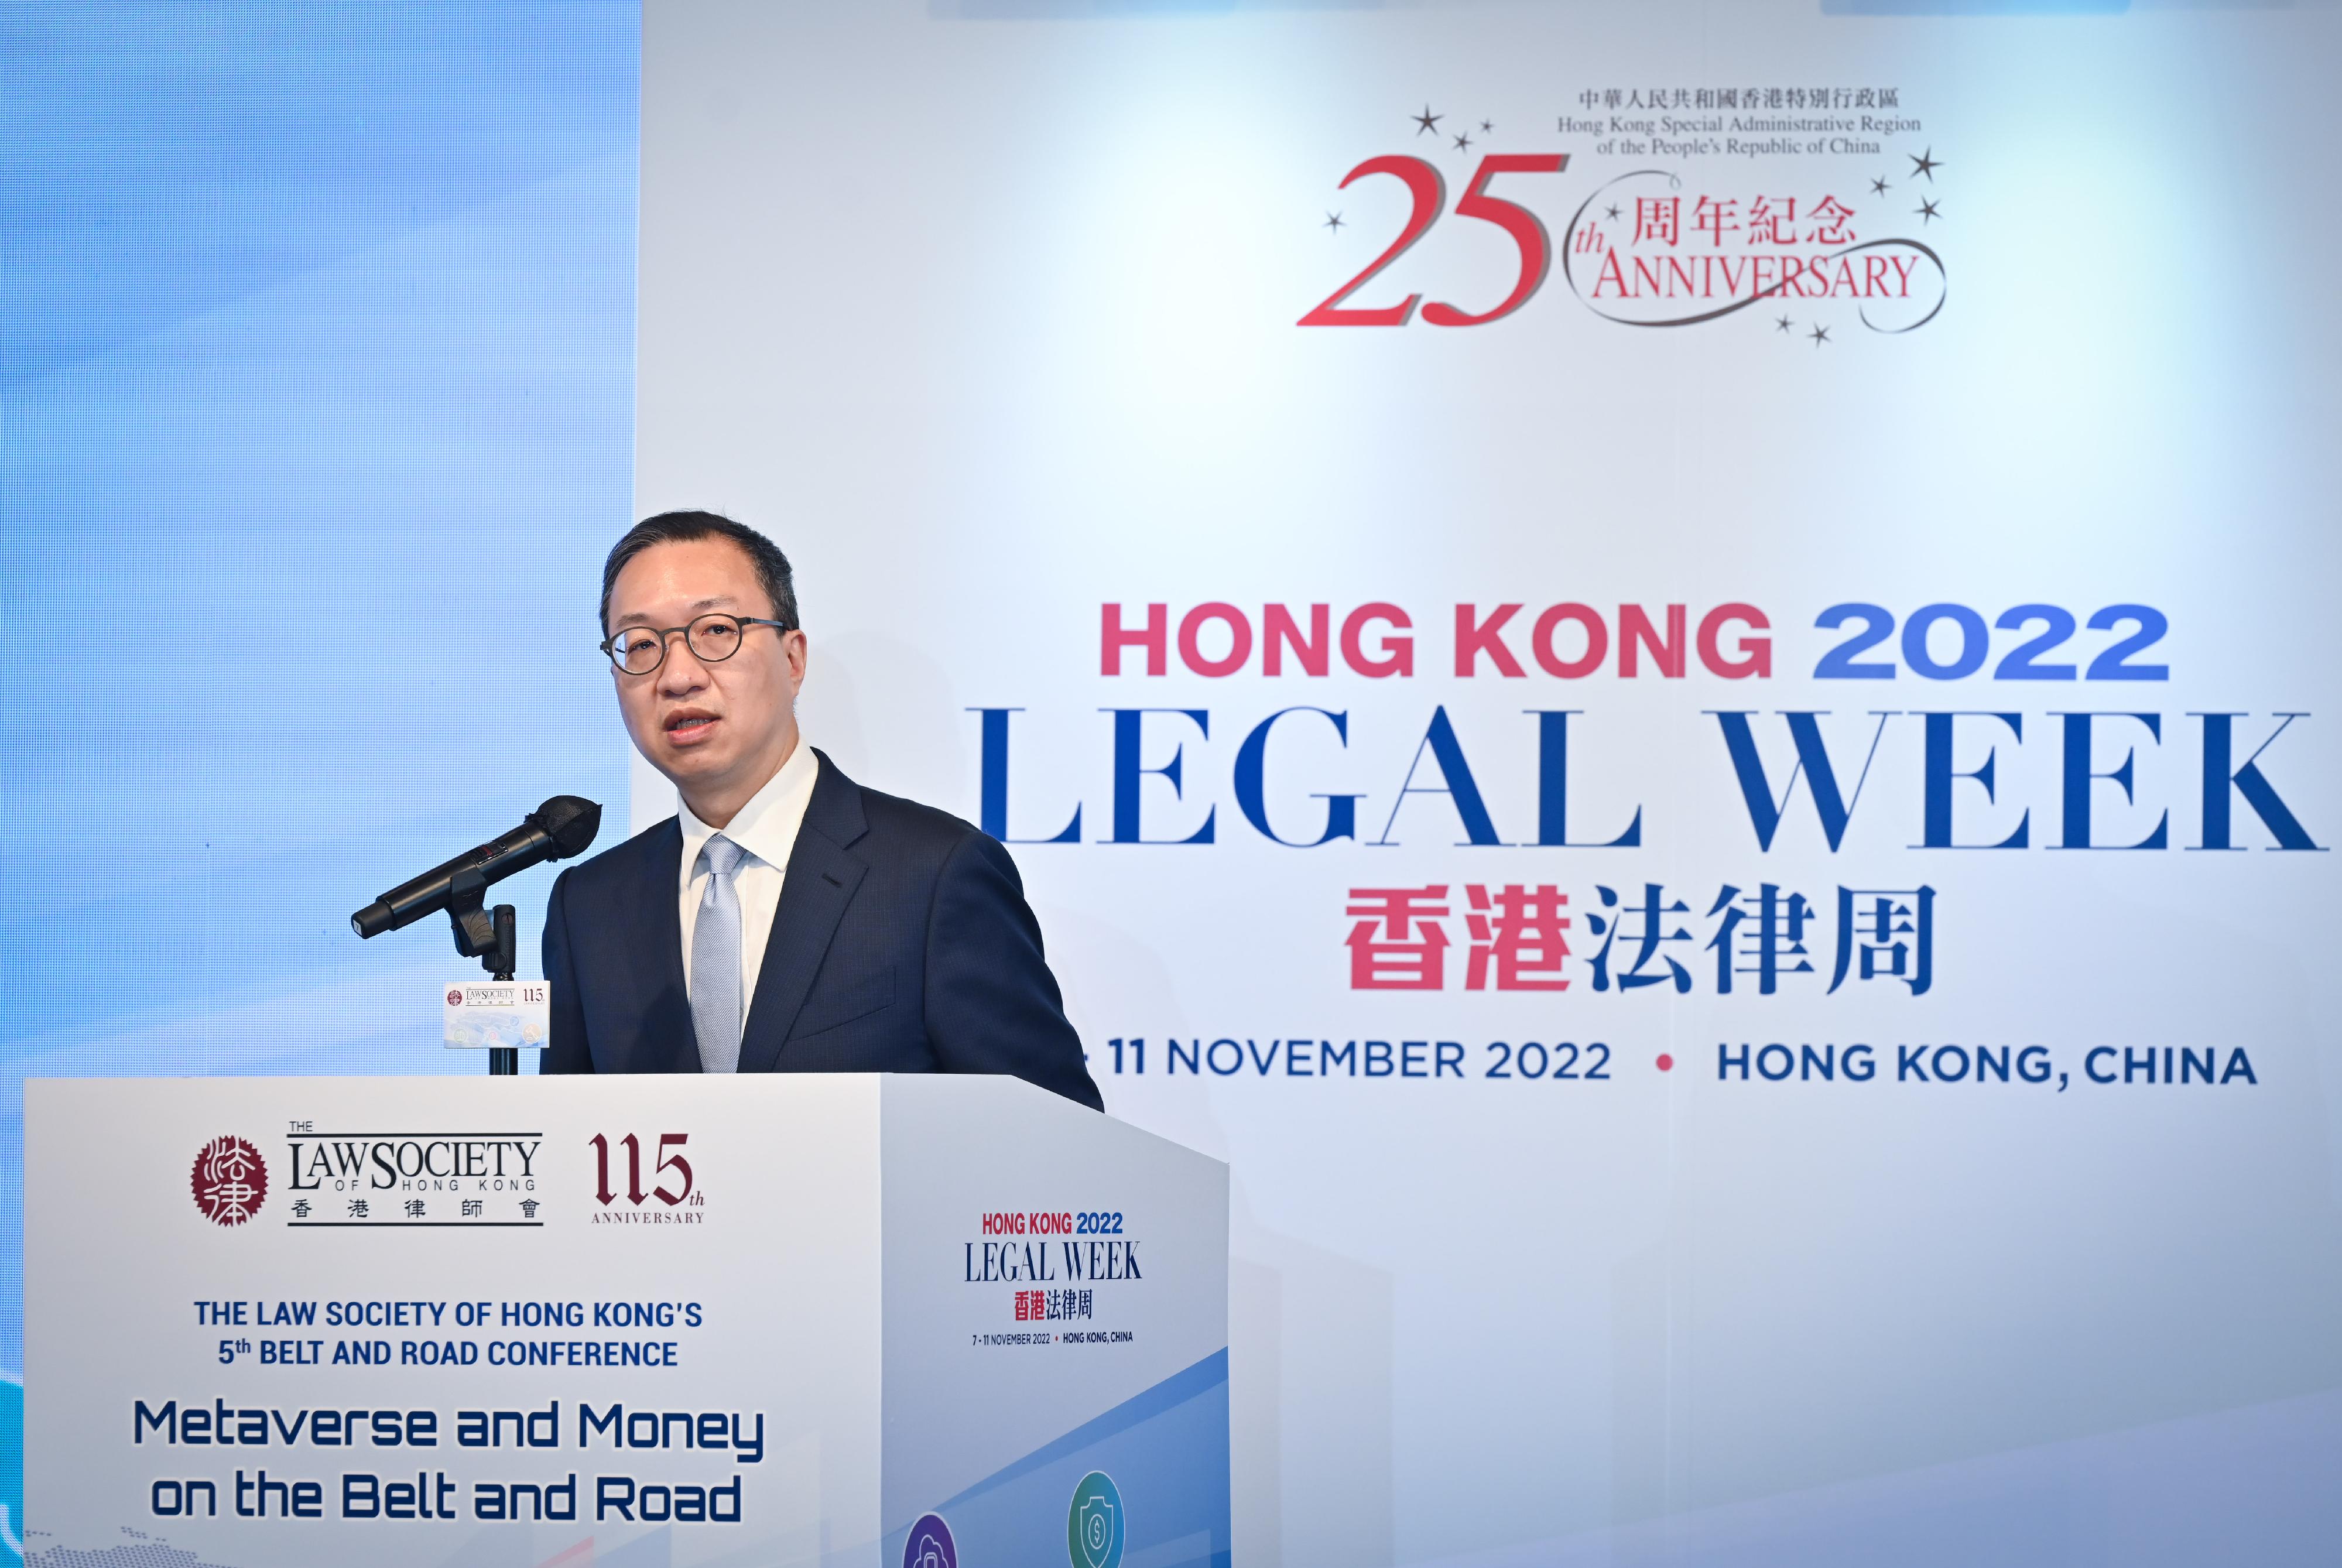 The Secretary for Justice, Mr Paul Lam, SC, speaks at the opening of the Law Society of Hong Kong's 5th Belt and Road Conference: Metaverse and Money on the Belt and Road under Hong Kong Legal Week 2022 today (November 10).